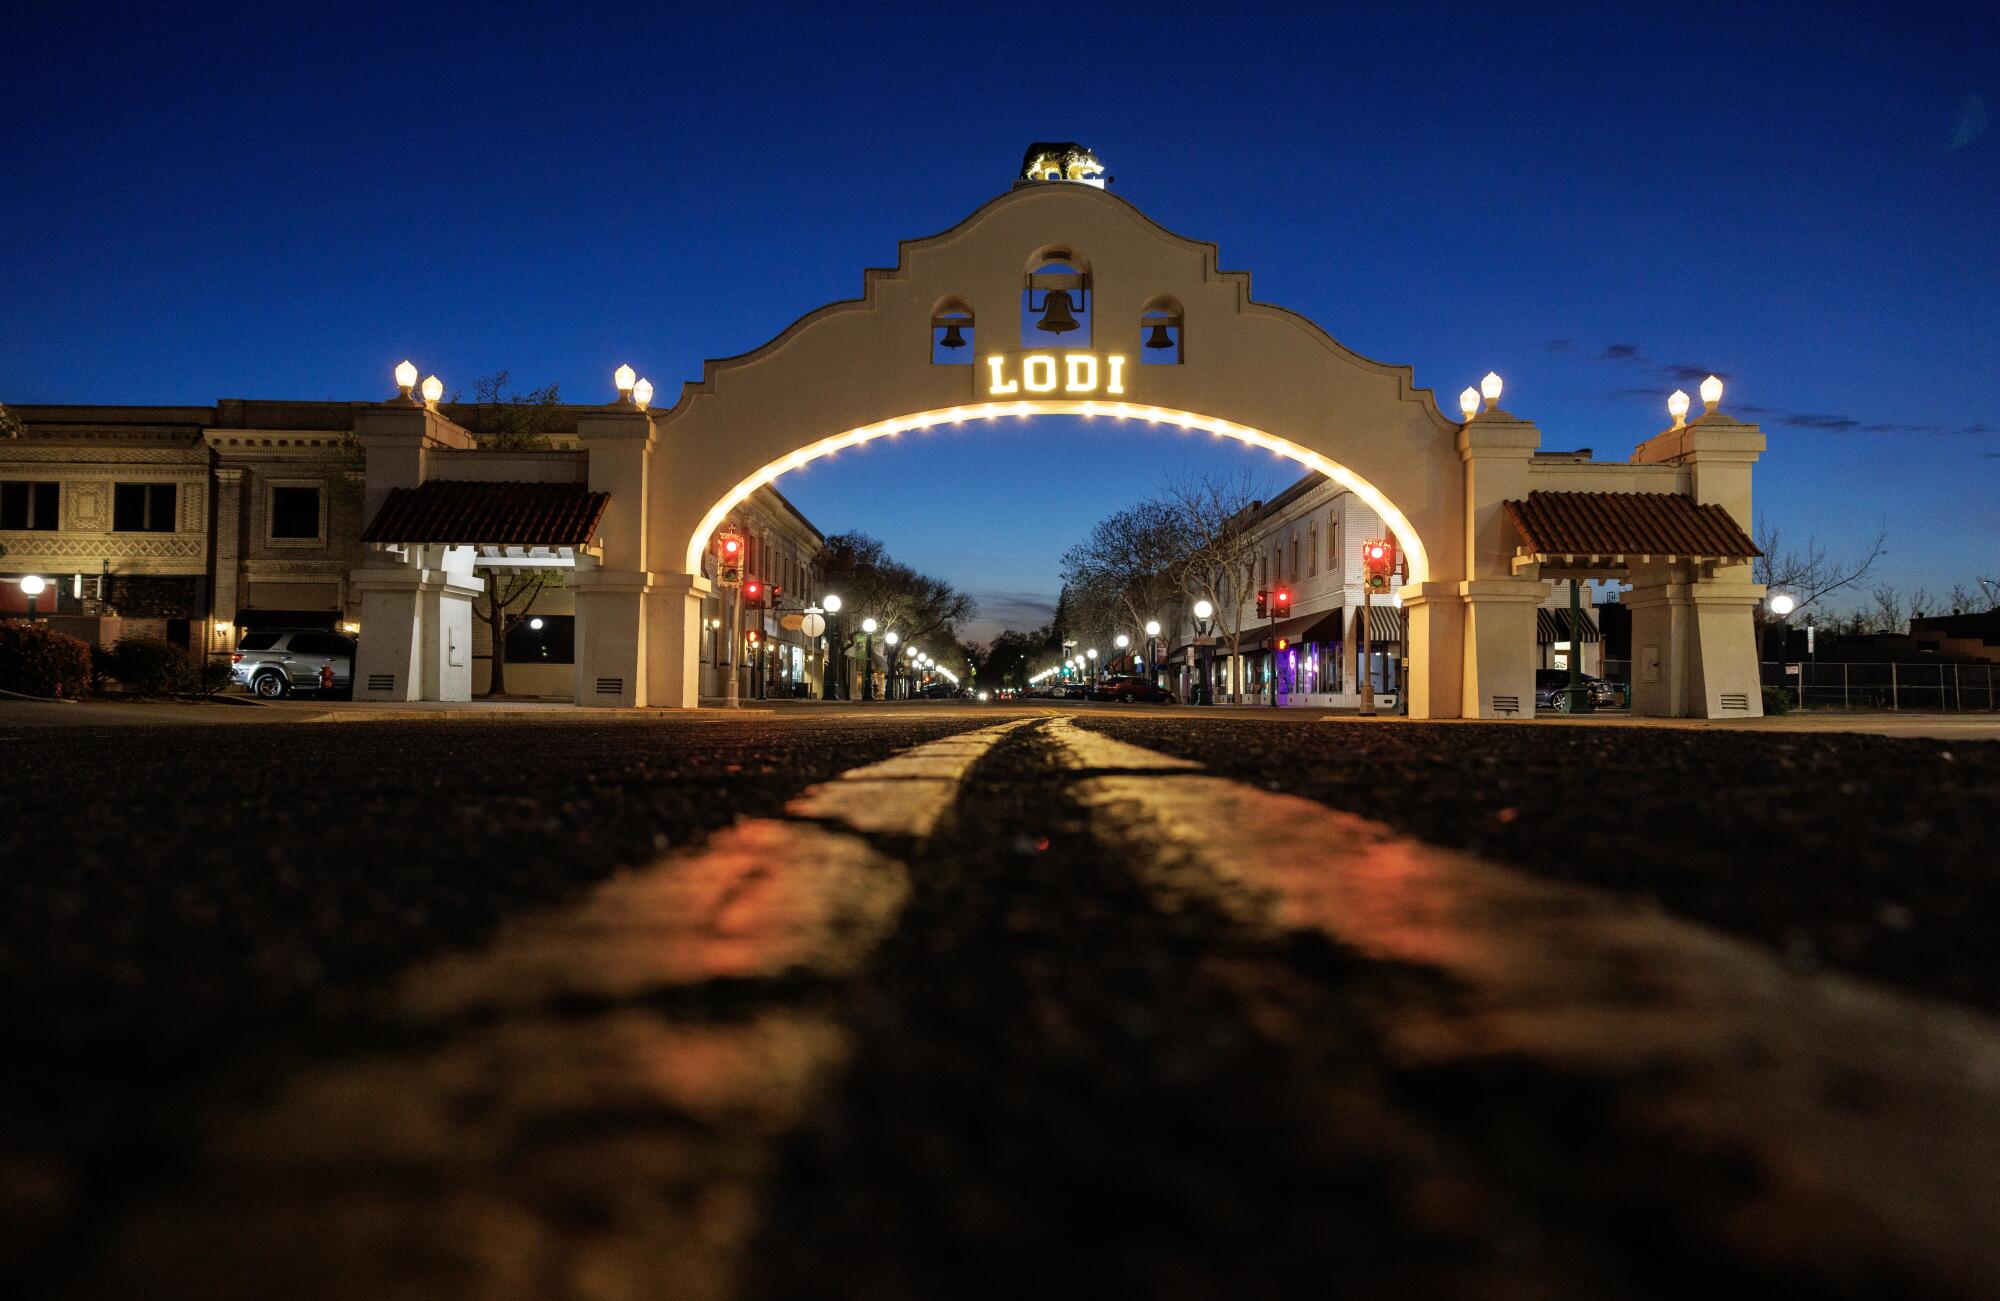 Lodi's arch at evening.